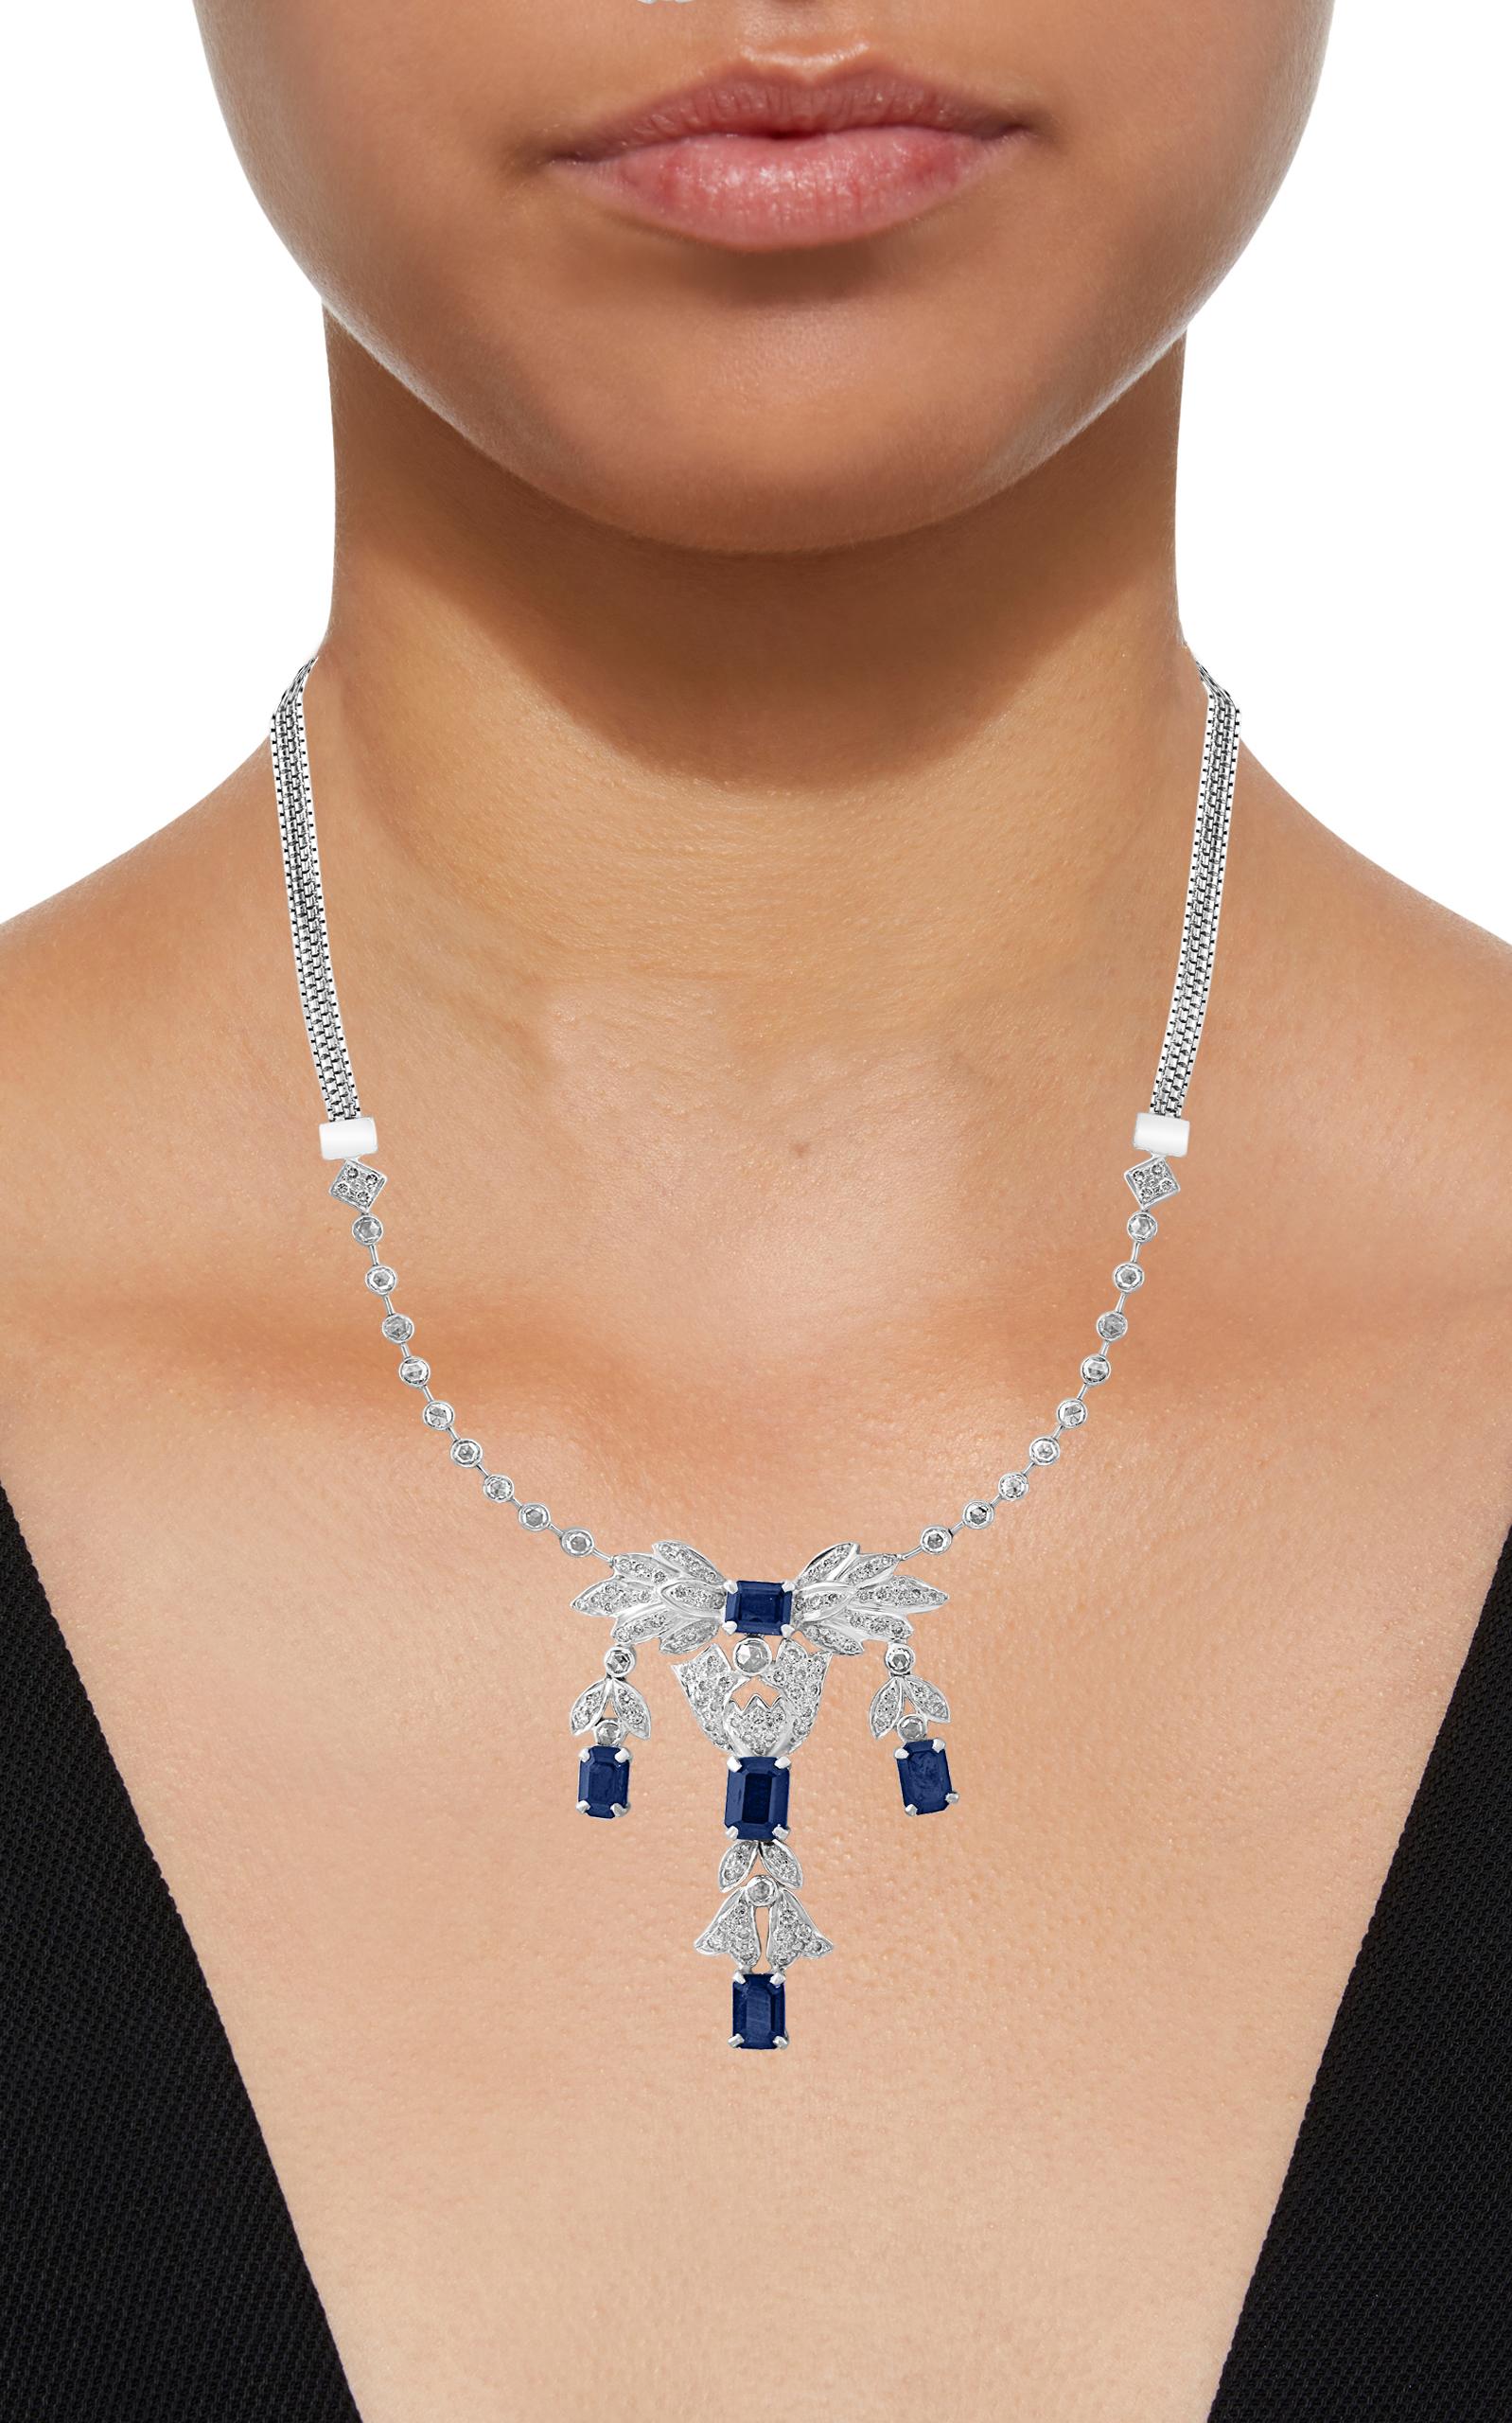 AGI Natural Blue Sapphire & Diamond Necklace 18 Karat White Gold, Suite, Estate In Excellent Condition For Sale In New York, NY